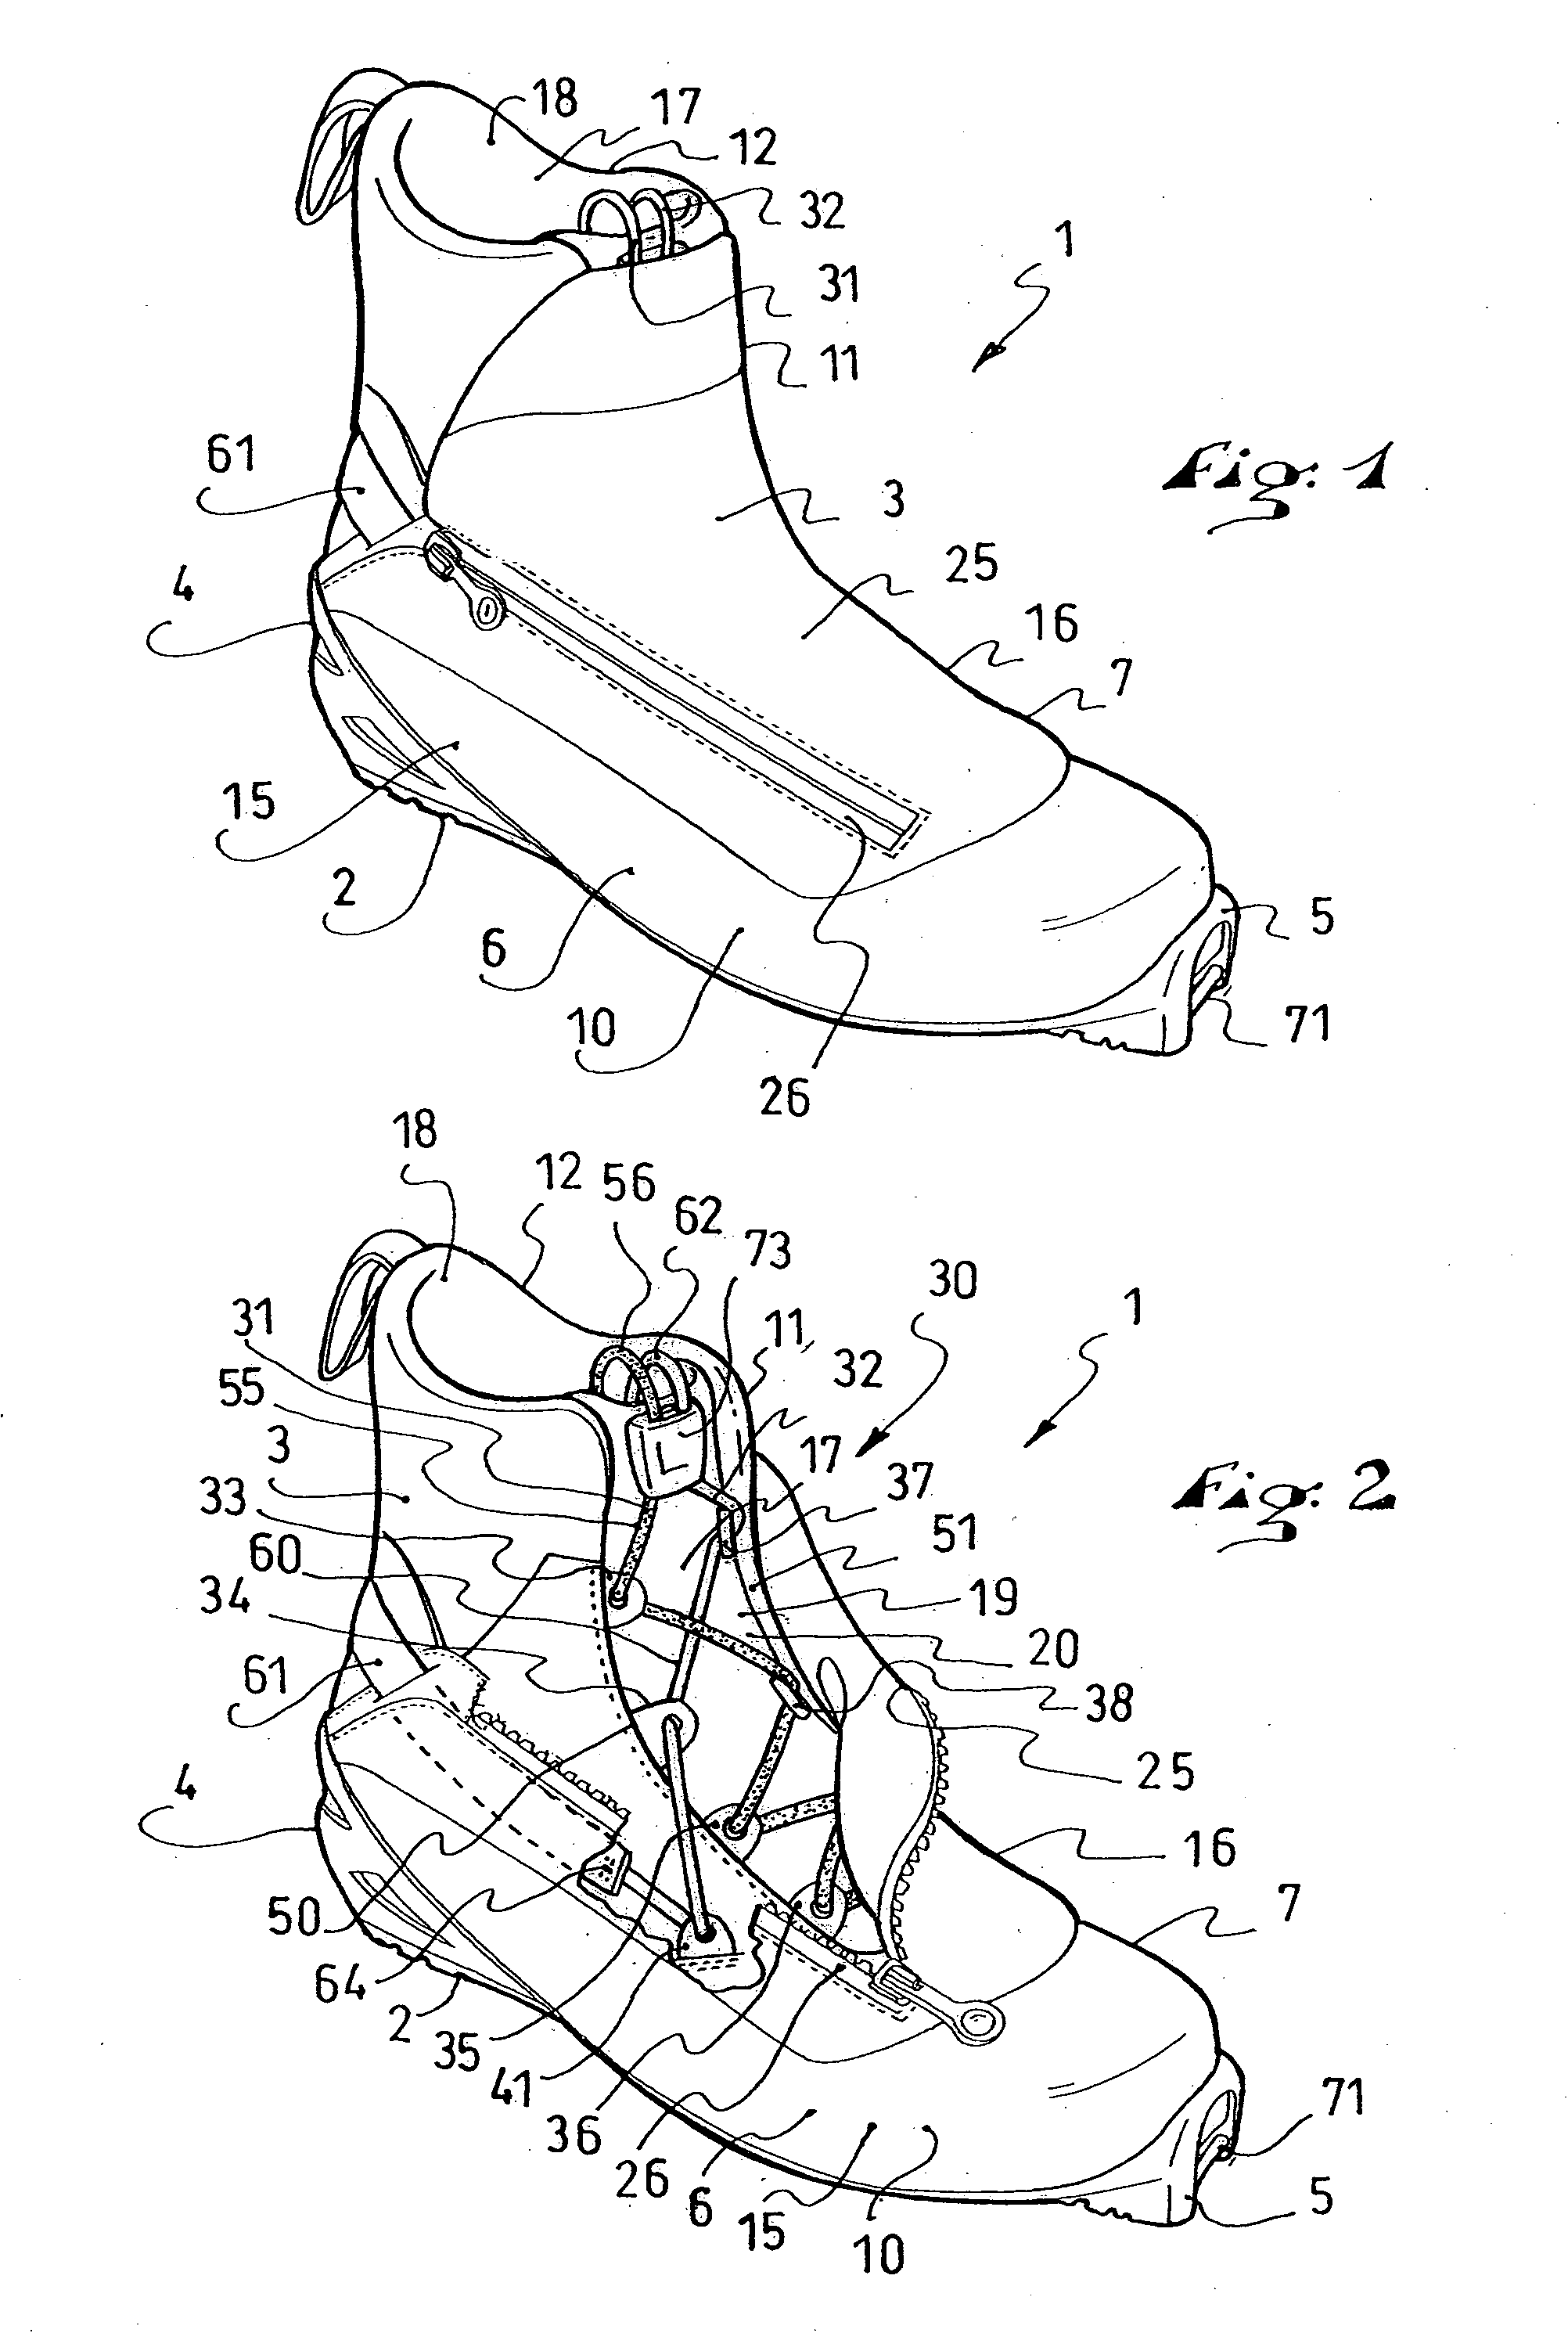 Boot with improved tightening of upper